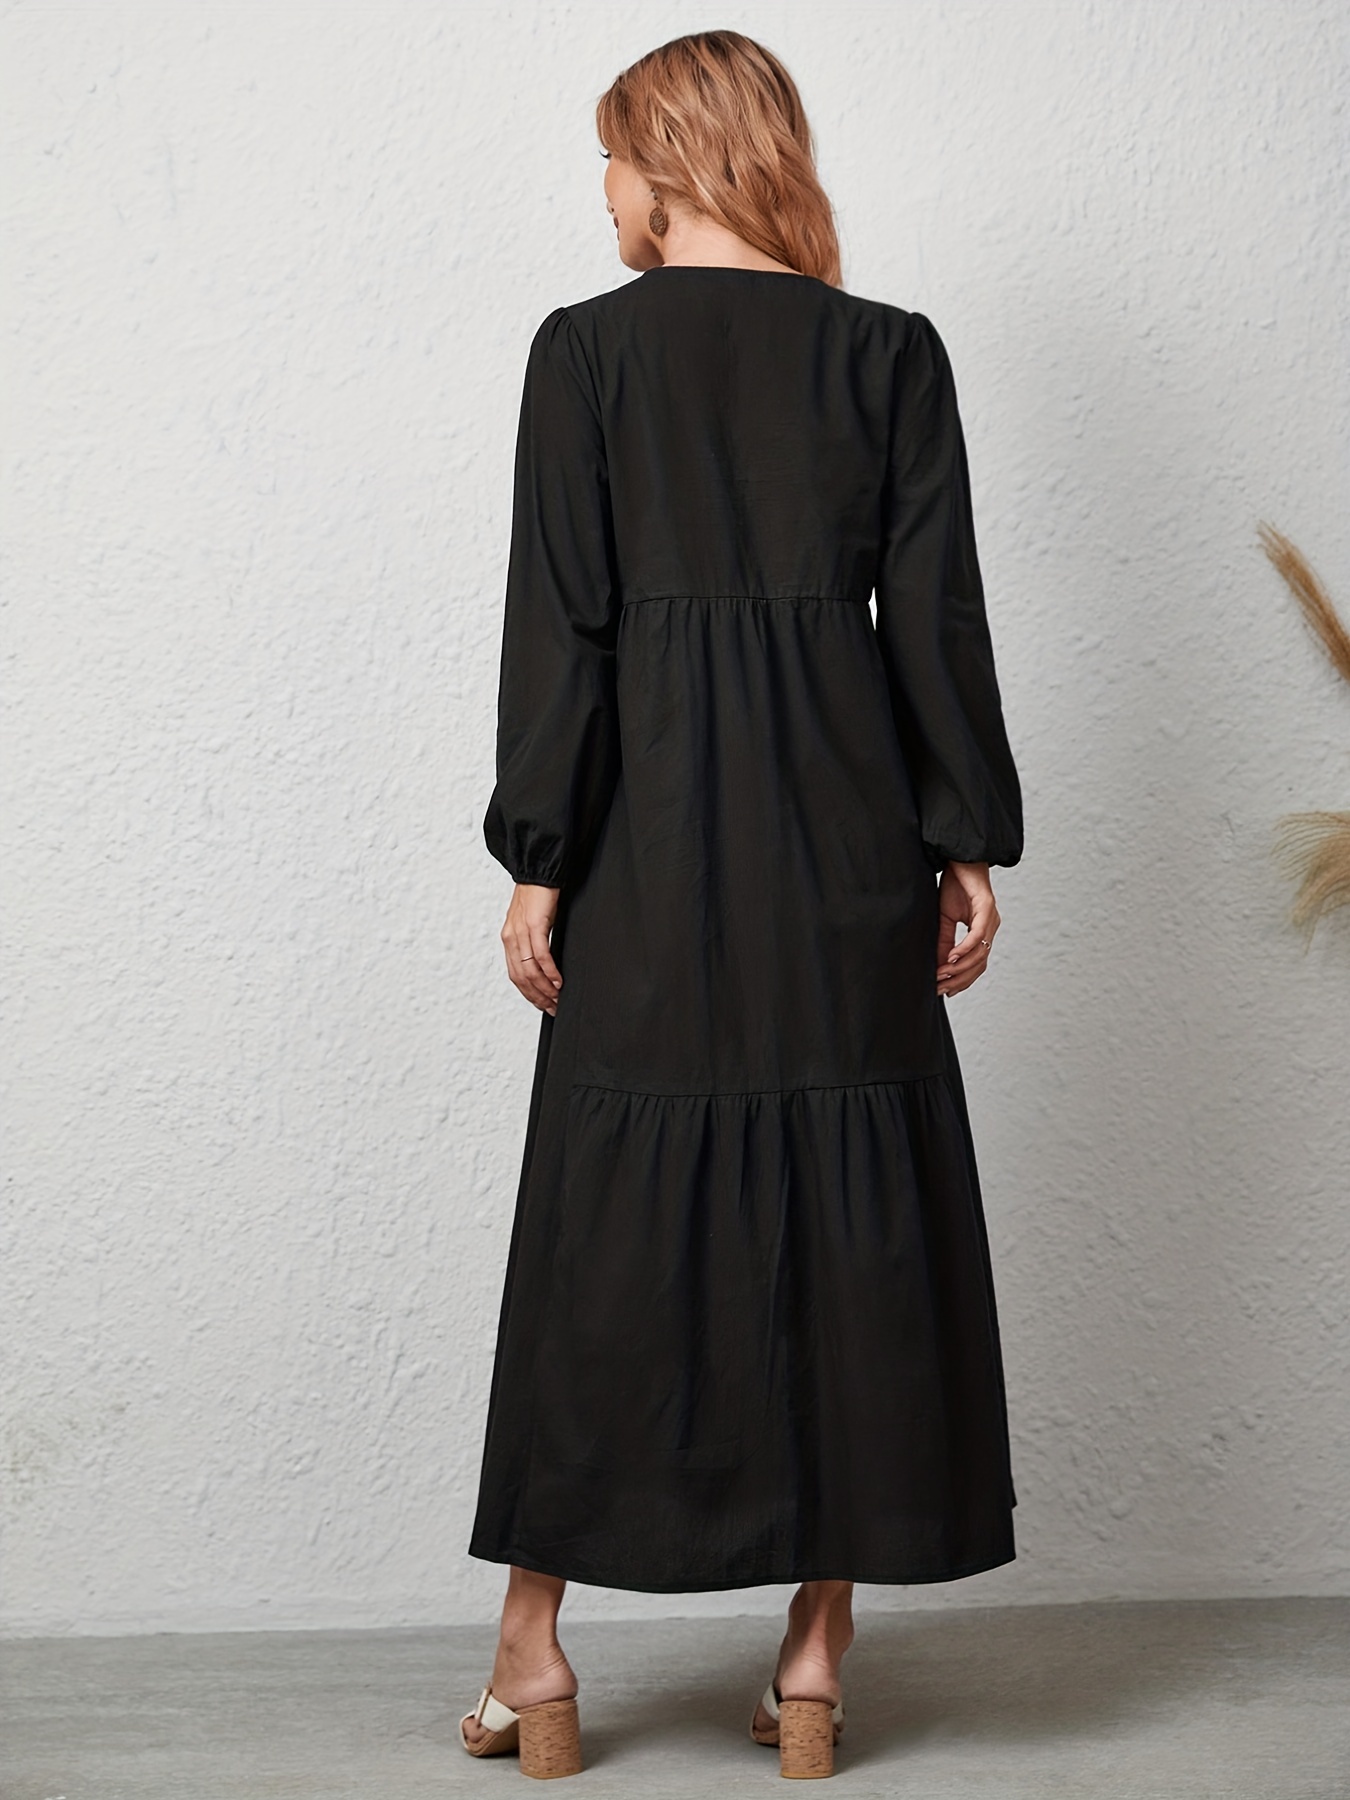 tiered lantern sleeve dress casual v neck solid maxi dress womens clothing